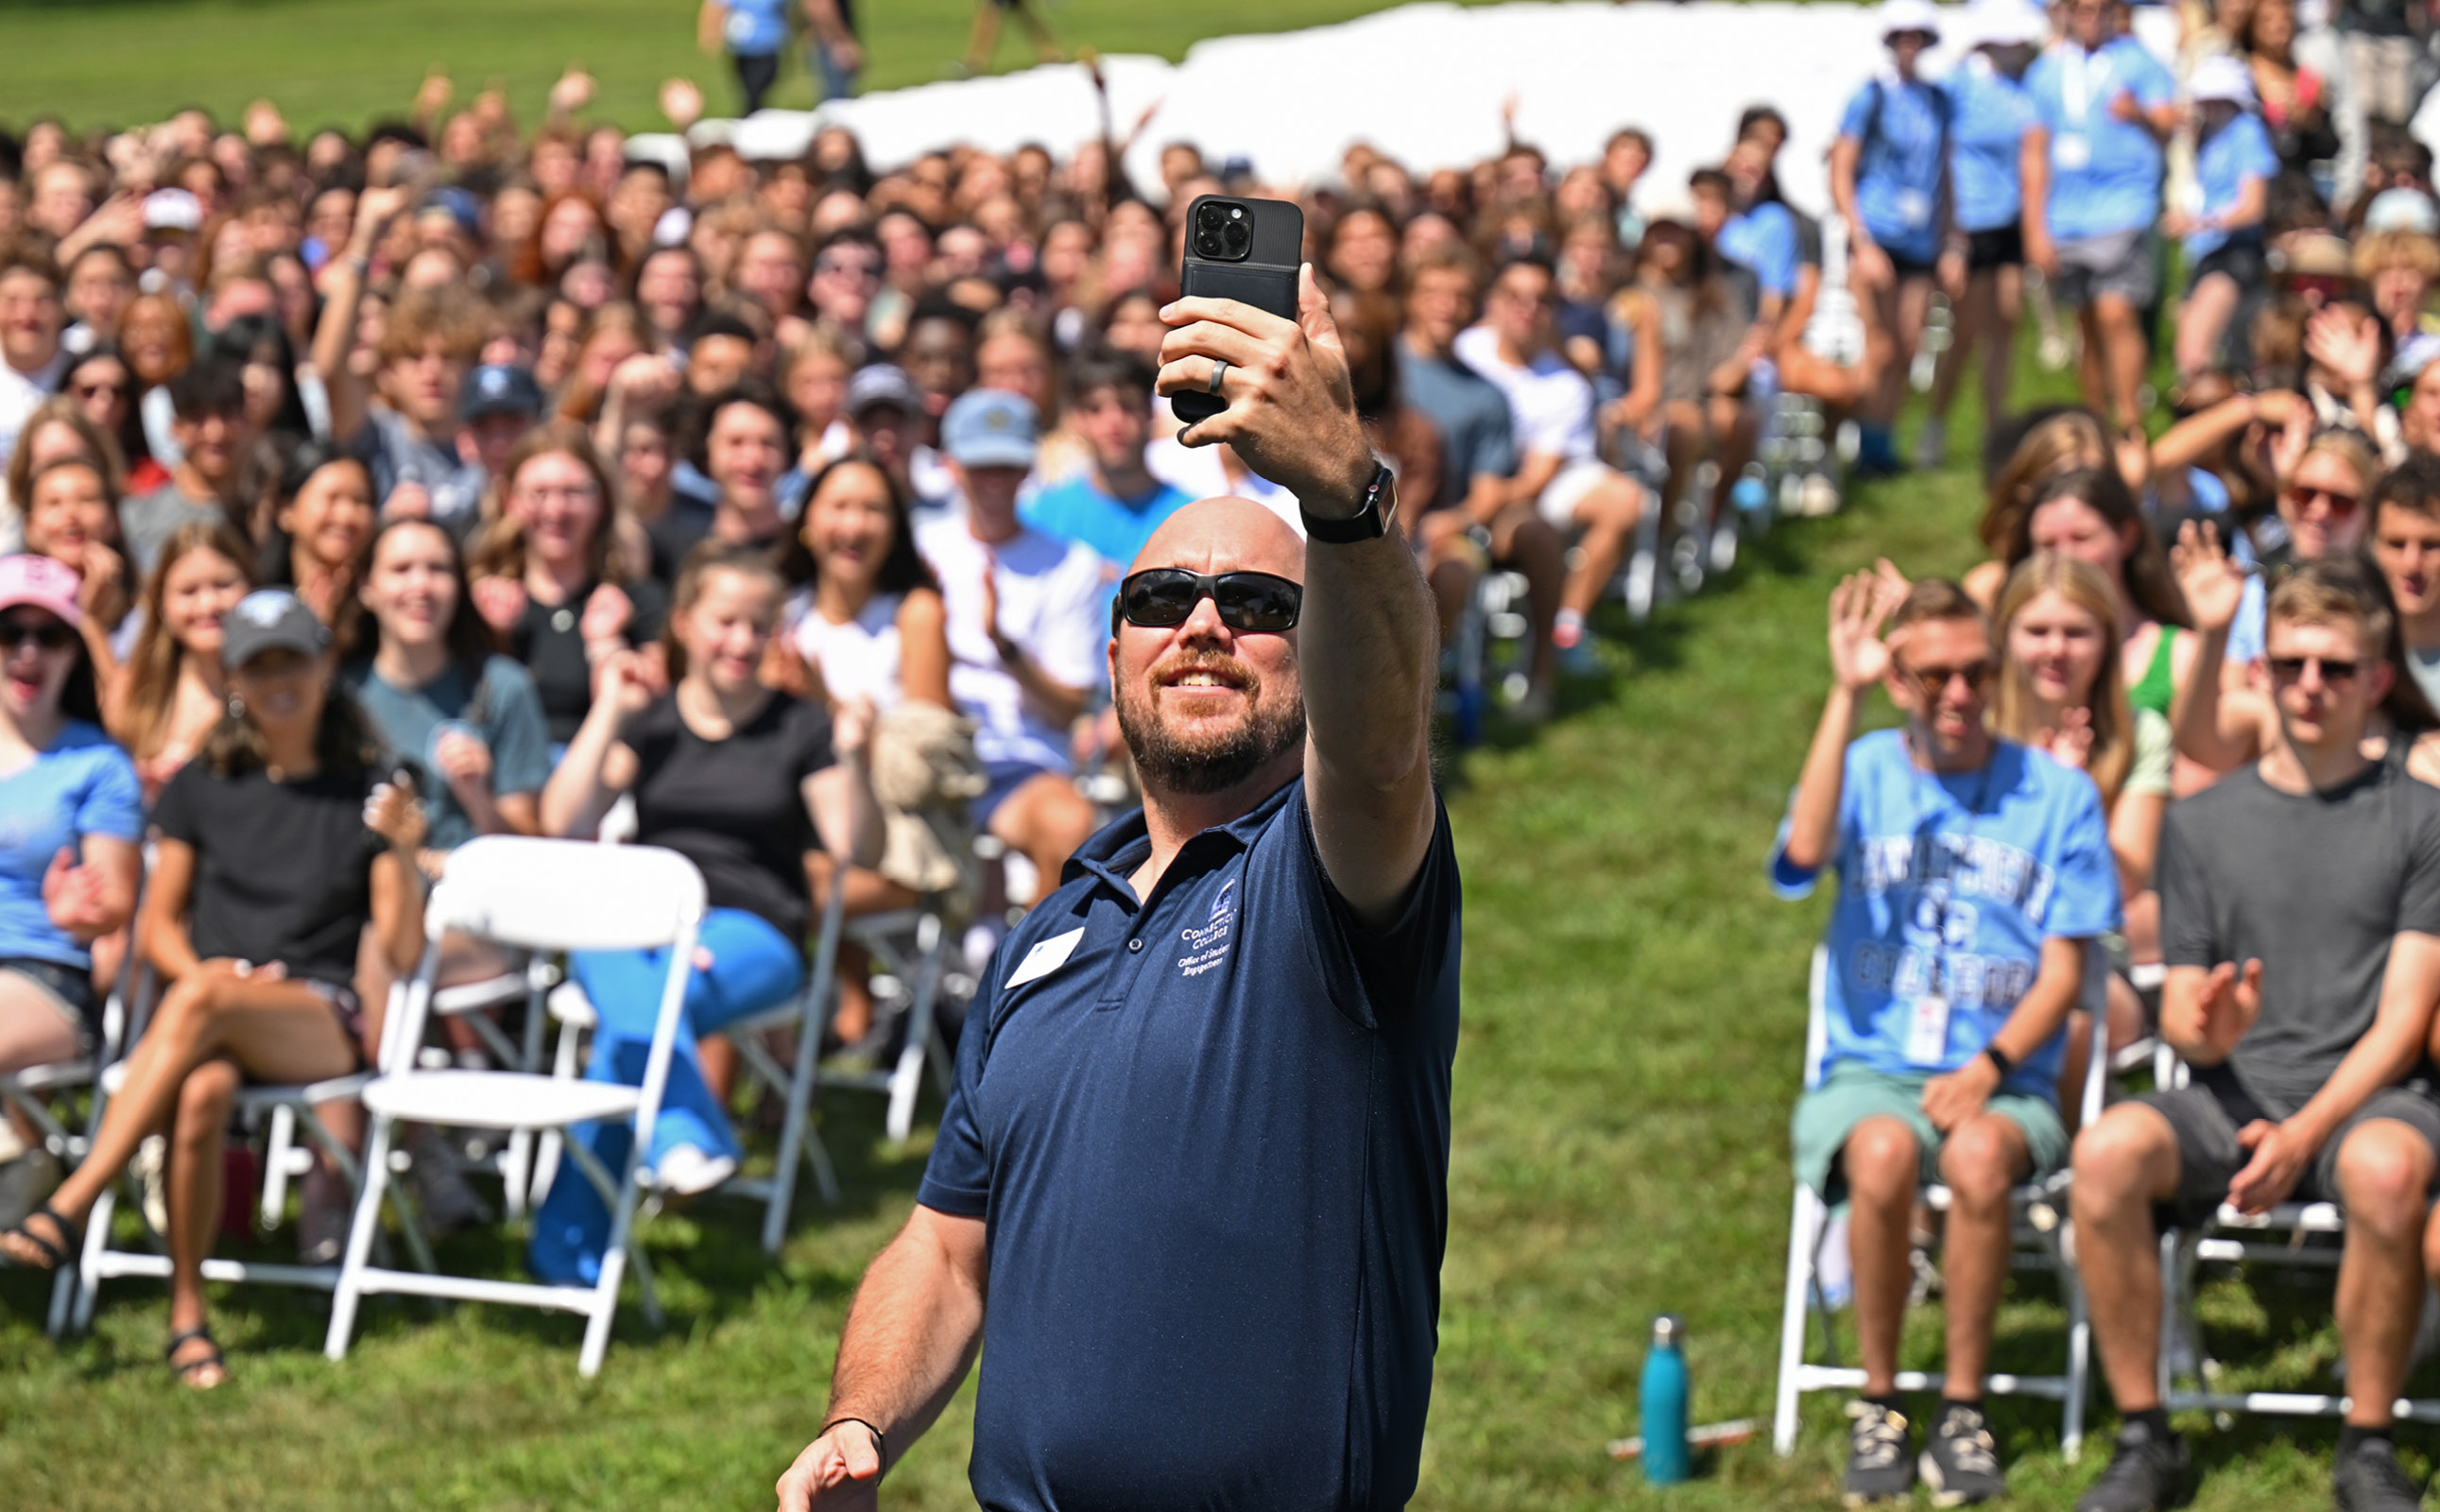 Assistant Dean Of Student Engagement And New Programs Geoff Norbert takes a selfie with a crowd of students